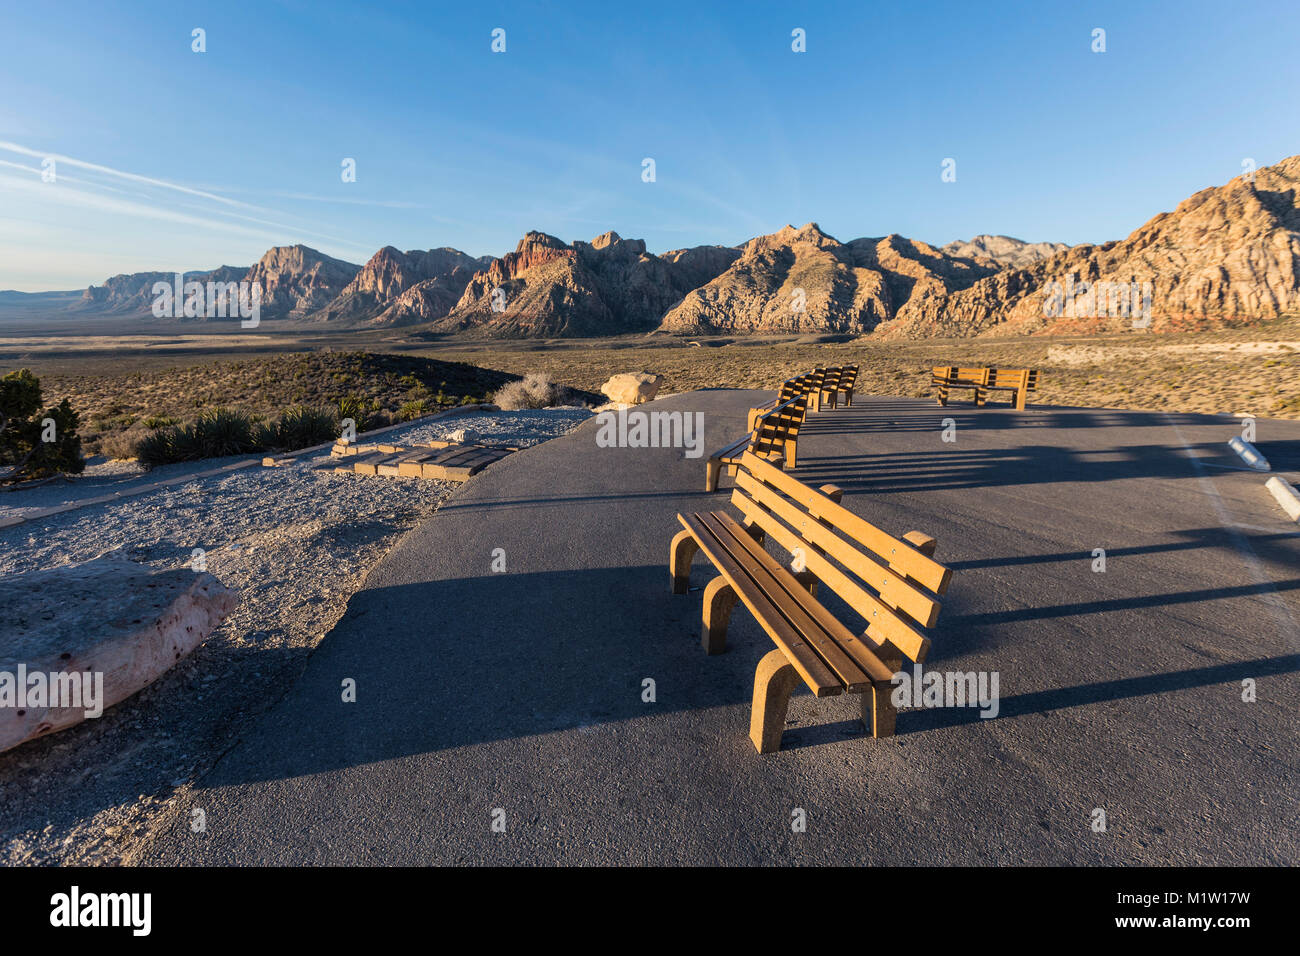 Welcoming benches in early morning light at Red Rock Canyon National Conservation Area scenic drive overlook near Las Vegas, Nevada. Stock Photo